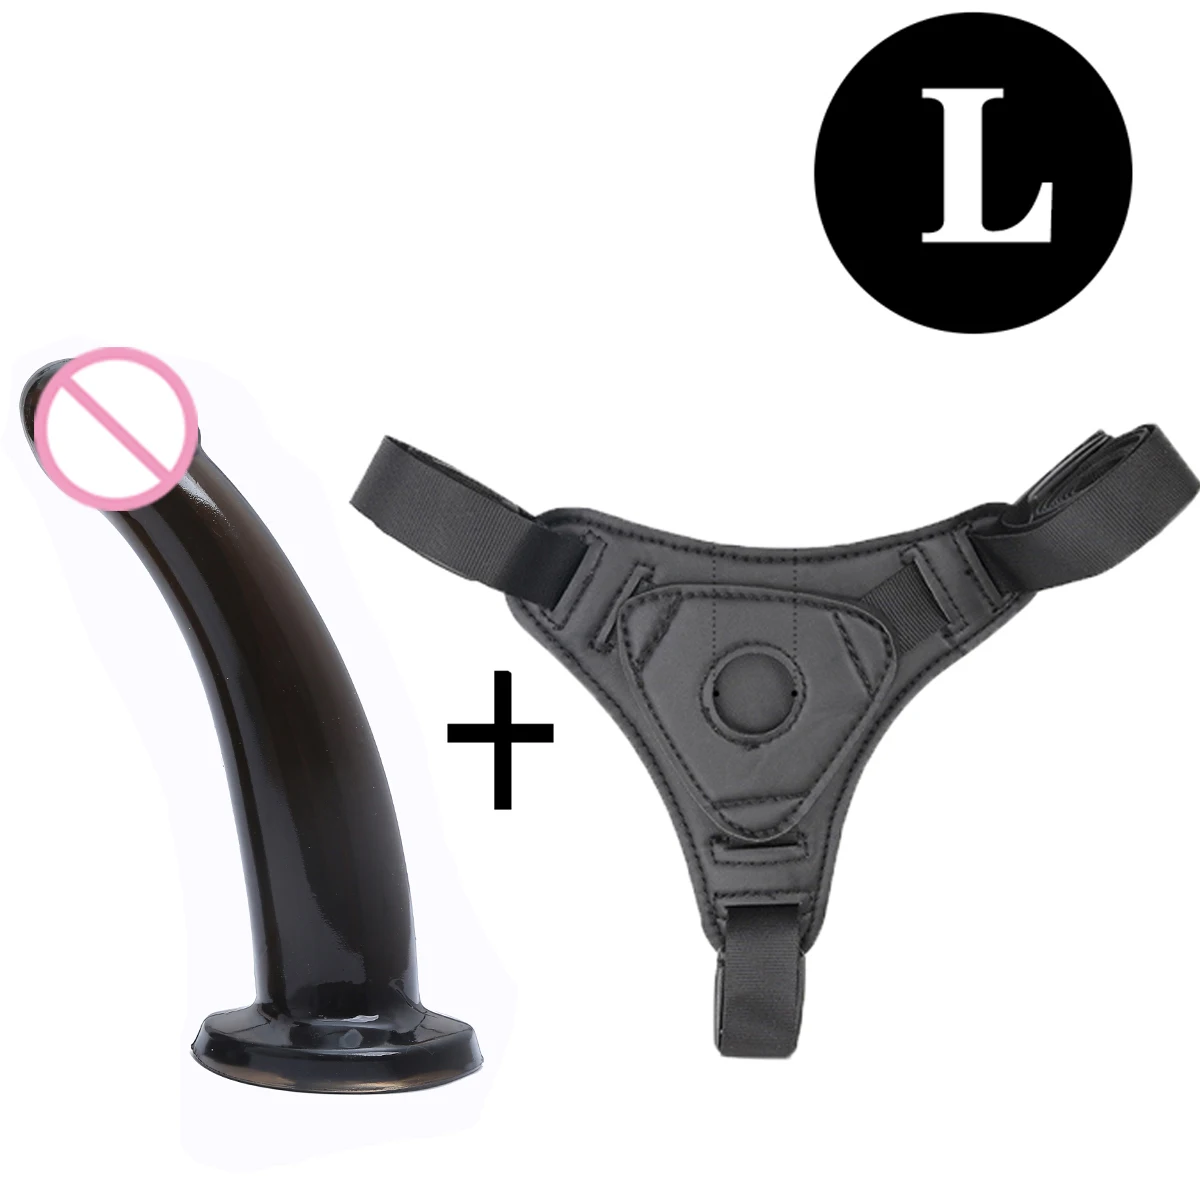 Double Penis Dual Ended Strapon Ultra Elastic Harness Belt Strap On Dildo Adult Sex Toys for Woman Couples Anal Soft Dildo Dildos cb5feb1b7314637725a2e7: Belt Gray L|Belt Gray M|Belt Gray S|Belt Transparent L|Belt Transparent M|Belt Transparent S|Black-L|Black-M|Black-S|Strap A|Strap B|Strap D Flesh|Strap E Black|Strap E Flesh|Strap E Purple|Strap H Black|Strap H Flesh|Strap H Purple|Transparent L|Transparent M|Transparent S